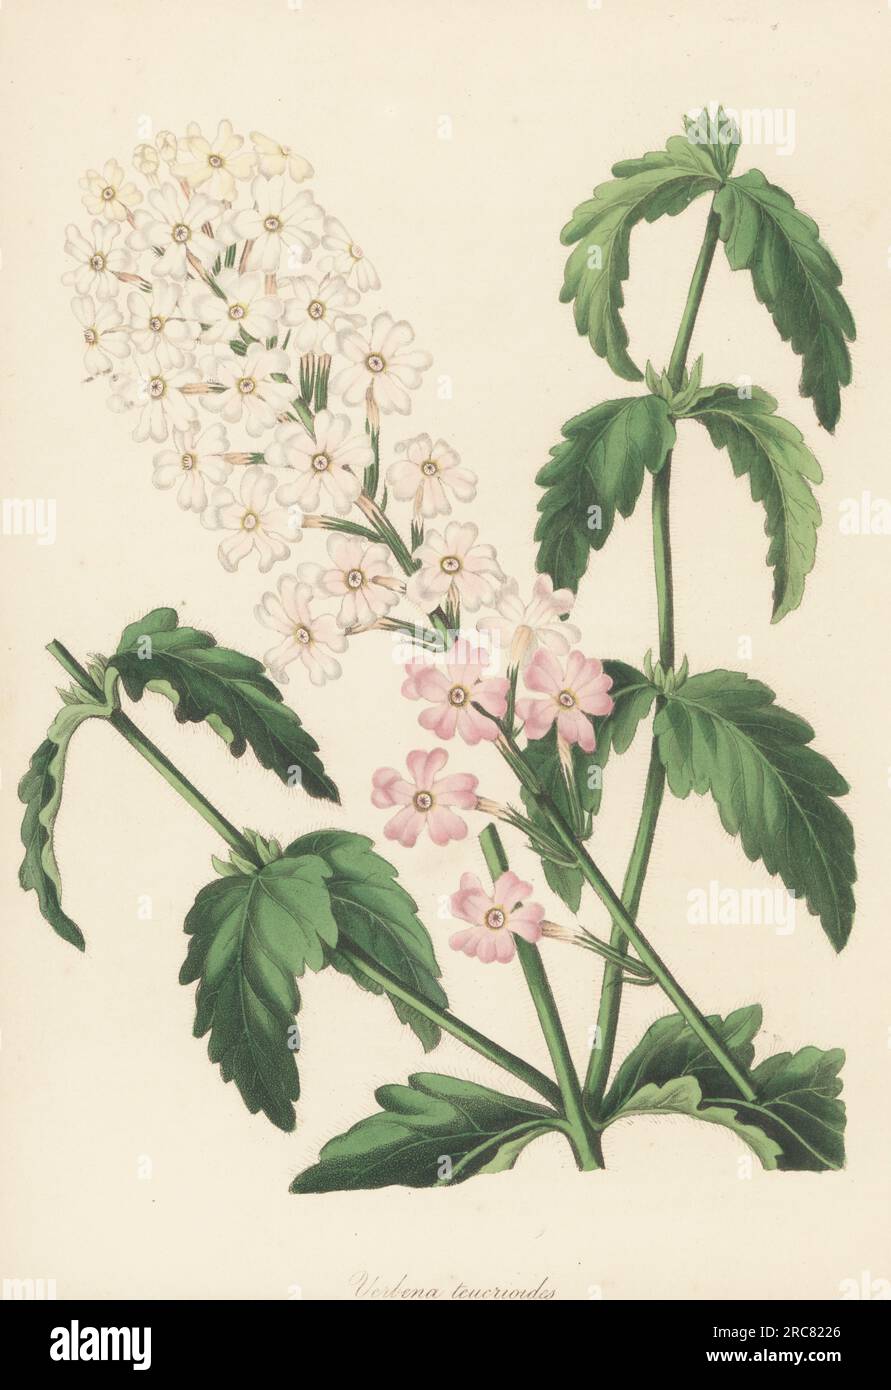 Mock vervain or mock verbena, Glandularia platensis. Native to South America, seeds sent from Buenos Ayres by Scottish plant collector James Tweedie. Teucrium-like verbena, Verbena teucrioides. Handcoloured lithograph from Joseph Paxton’s Magazine of Botany, and Register of Flowering Plants, Volume 5, Orr and Smith, London, 1838. Stock Photo